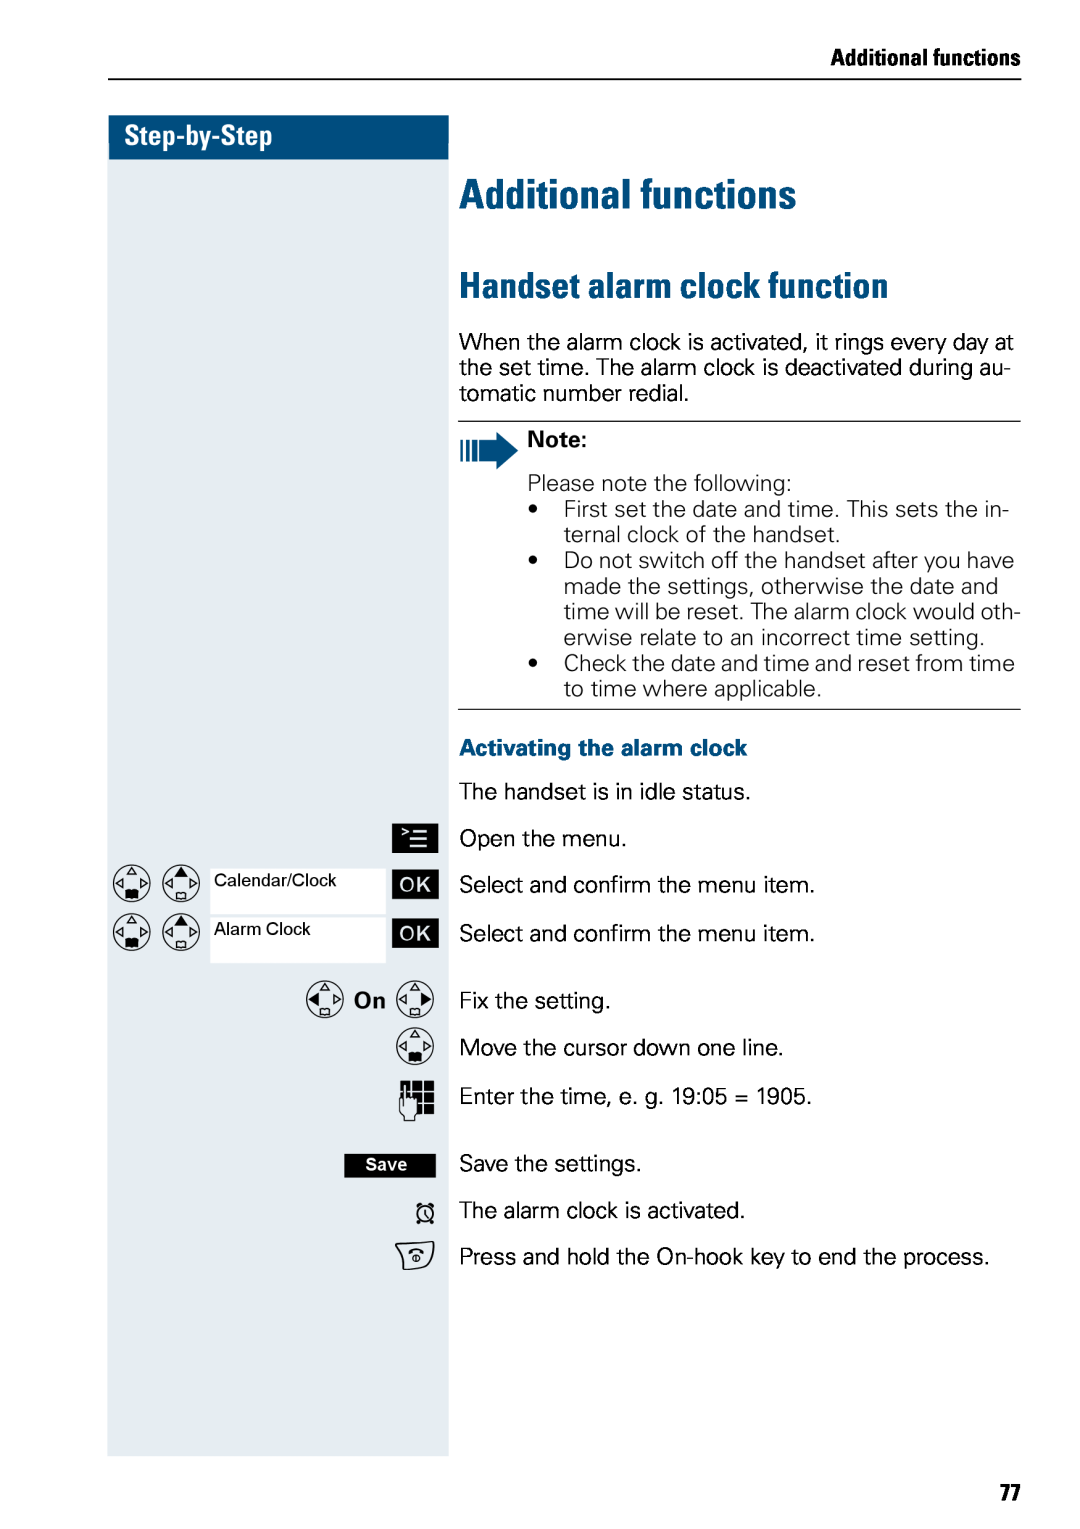 Siemens 500 manual Additional functions, Handset alarm clock function, Step-by-Step, FOn G, Activating the alarm clock 